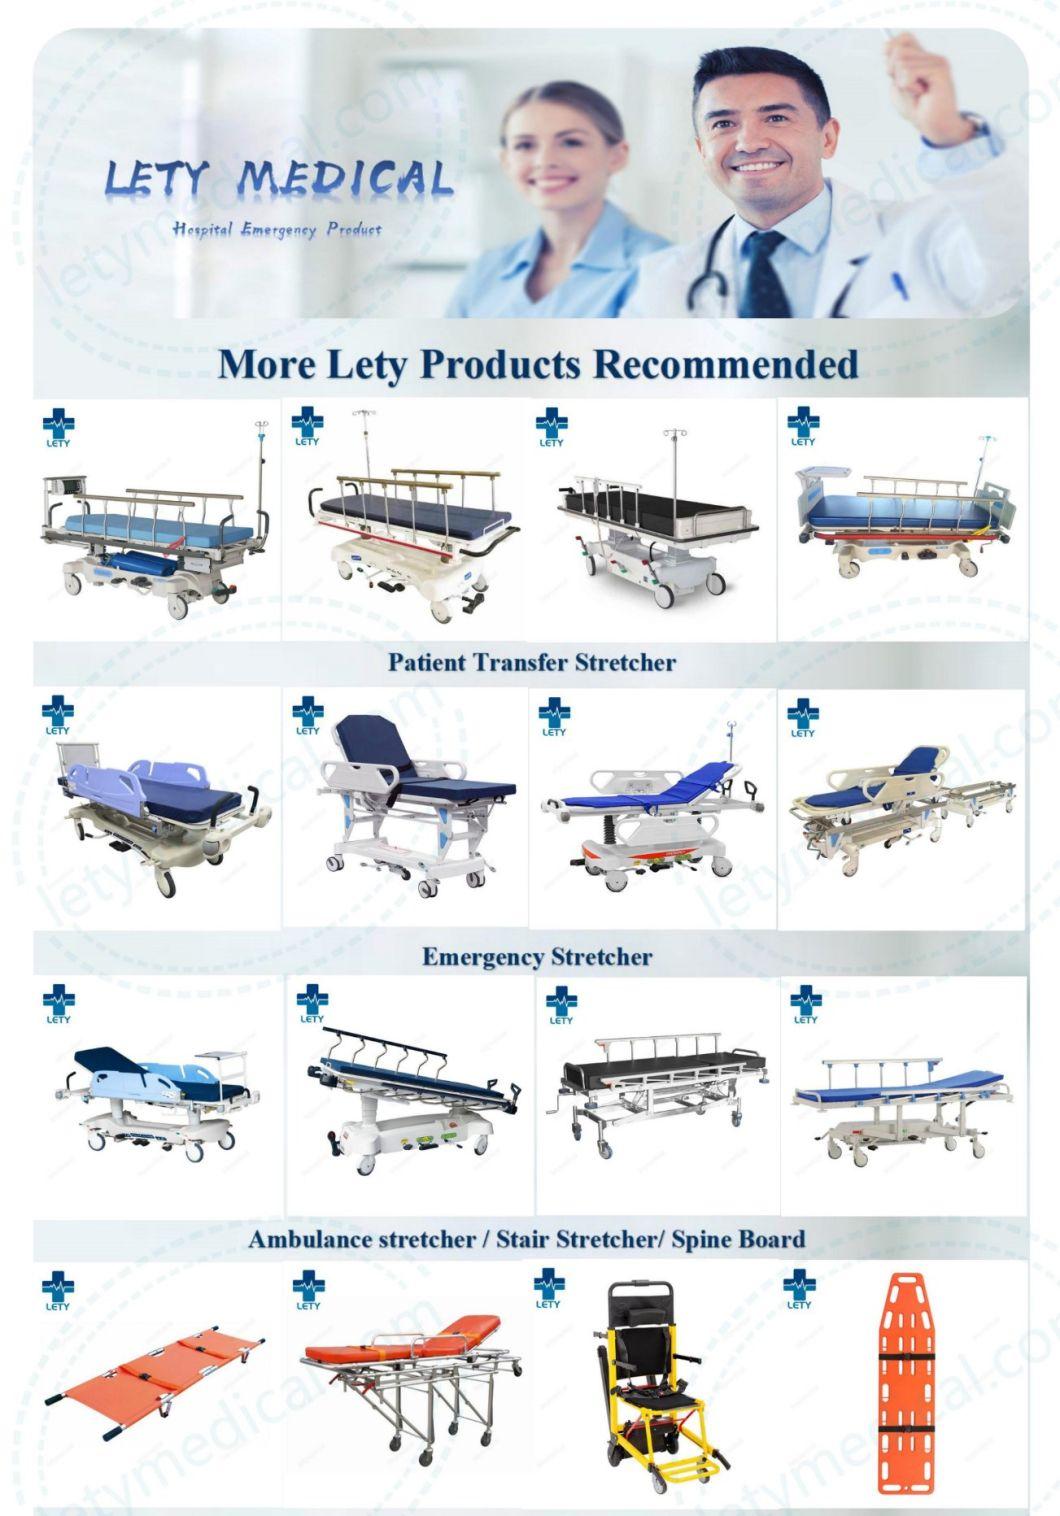 Recliner Chair for Hospital Reclining Phlebotomy Chair